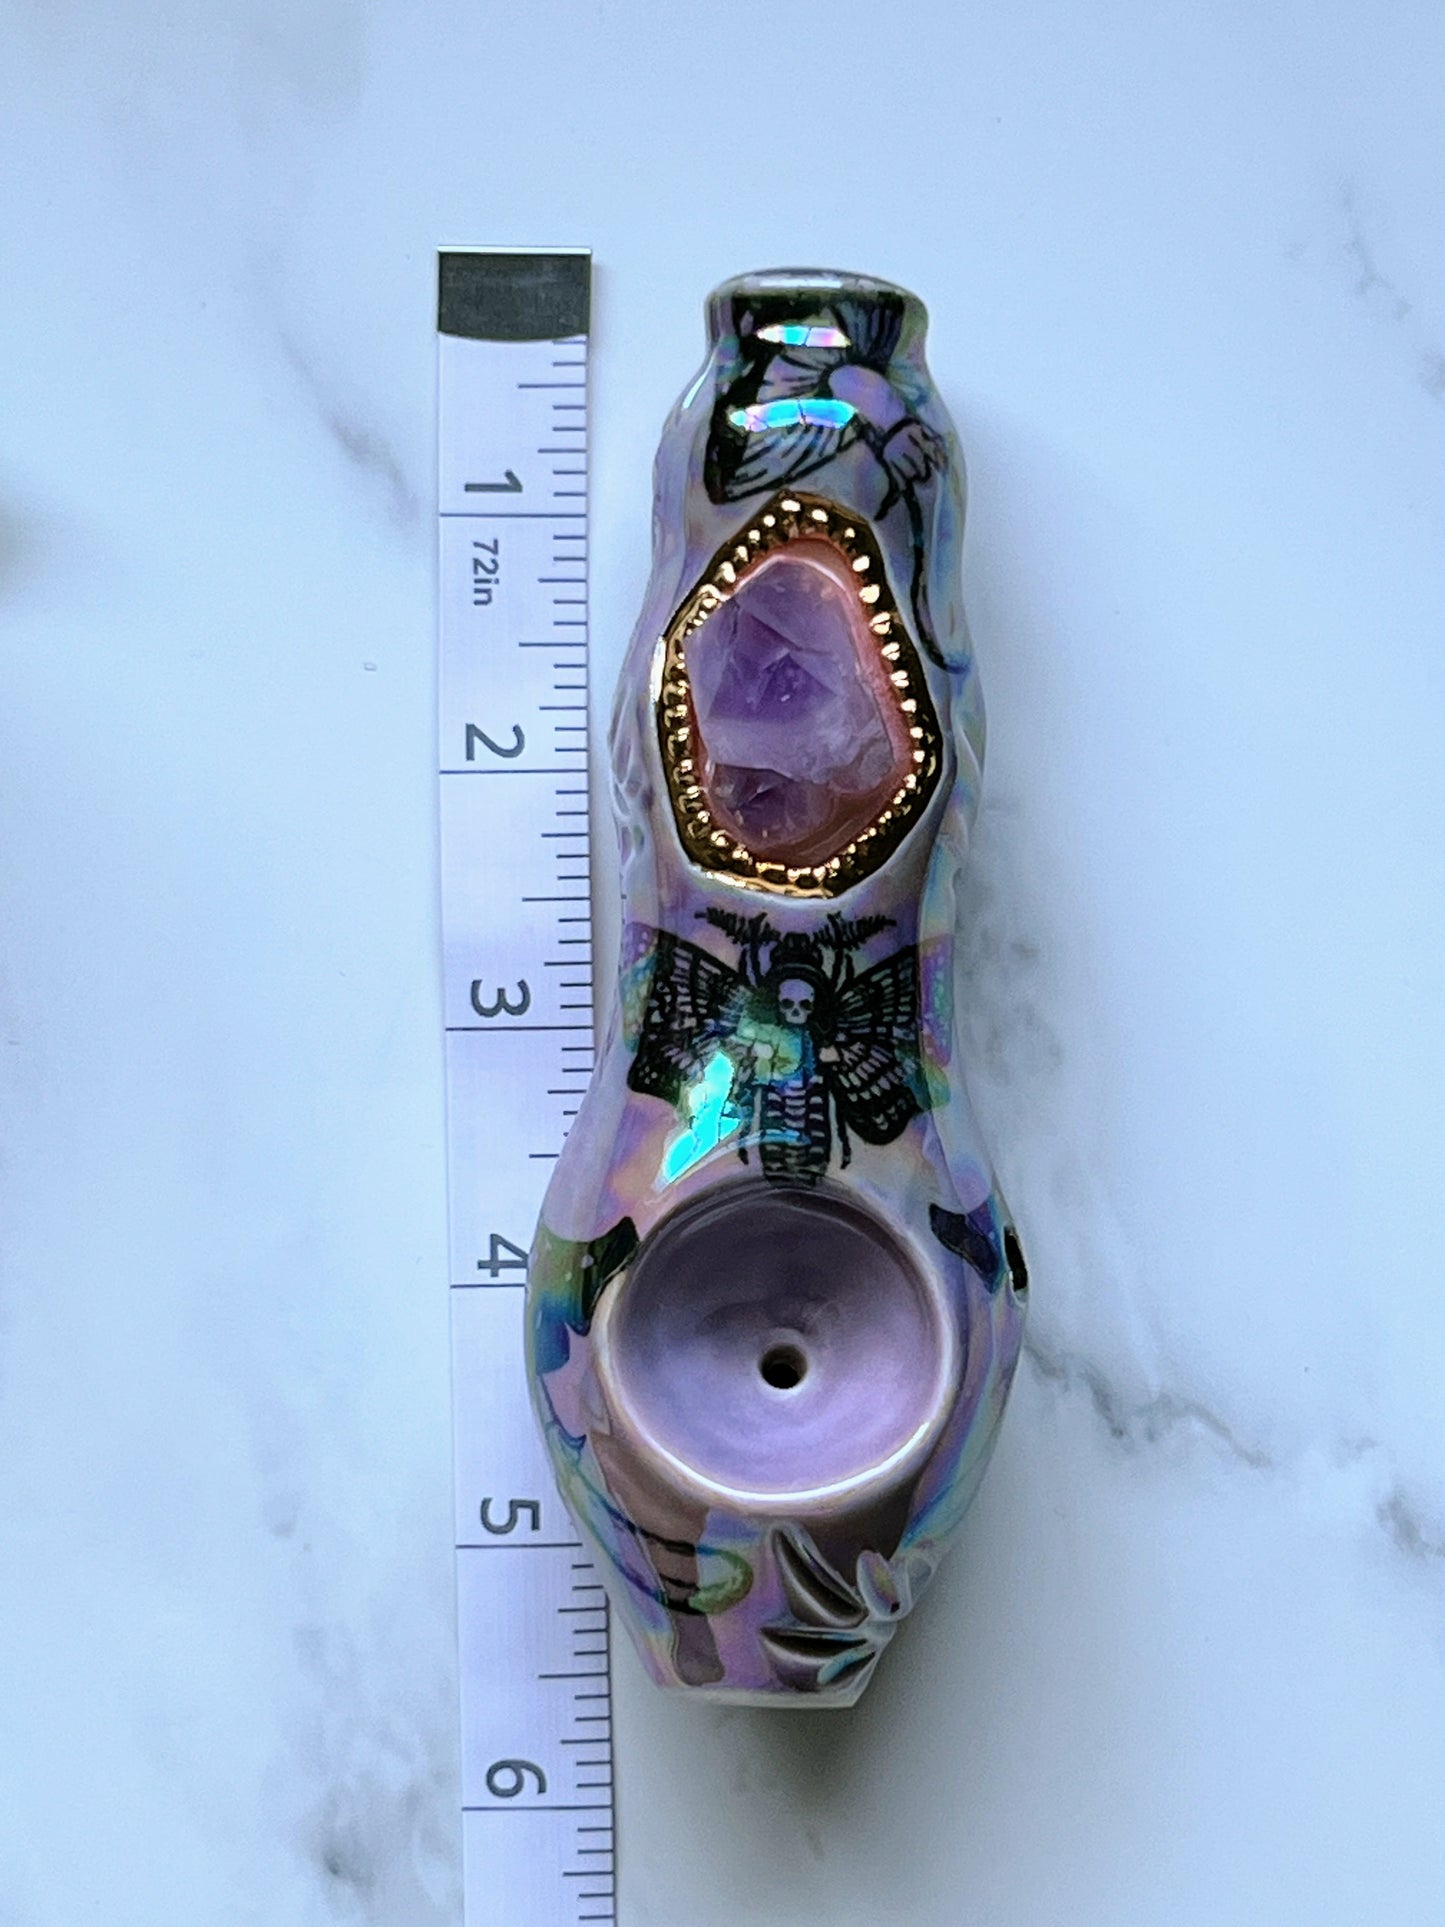 Amethyst Pipe with Deathhead Moth and Mushrooms Iridescent Porcelain Smoking Pipe